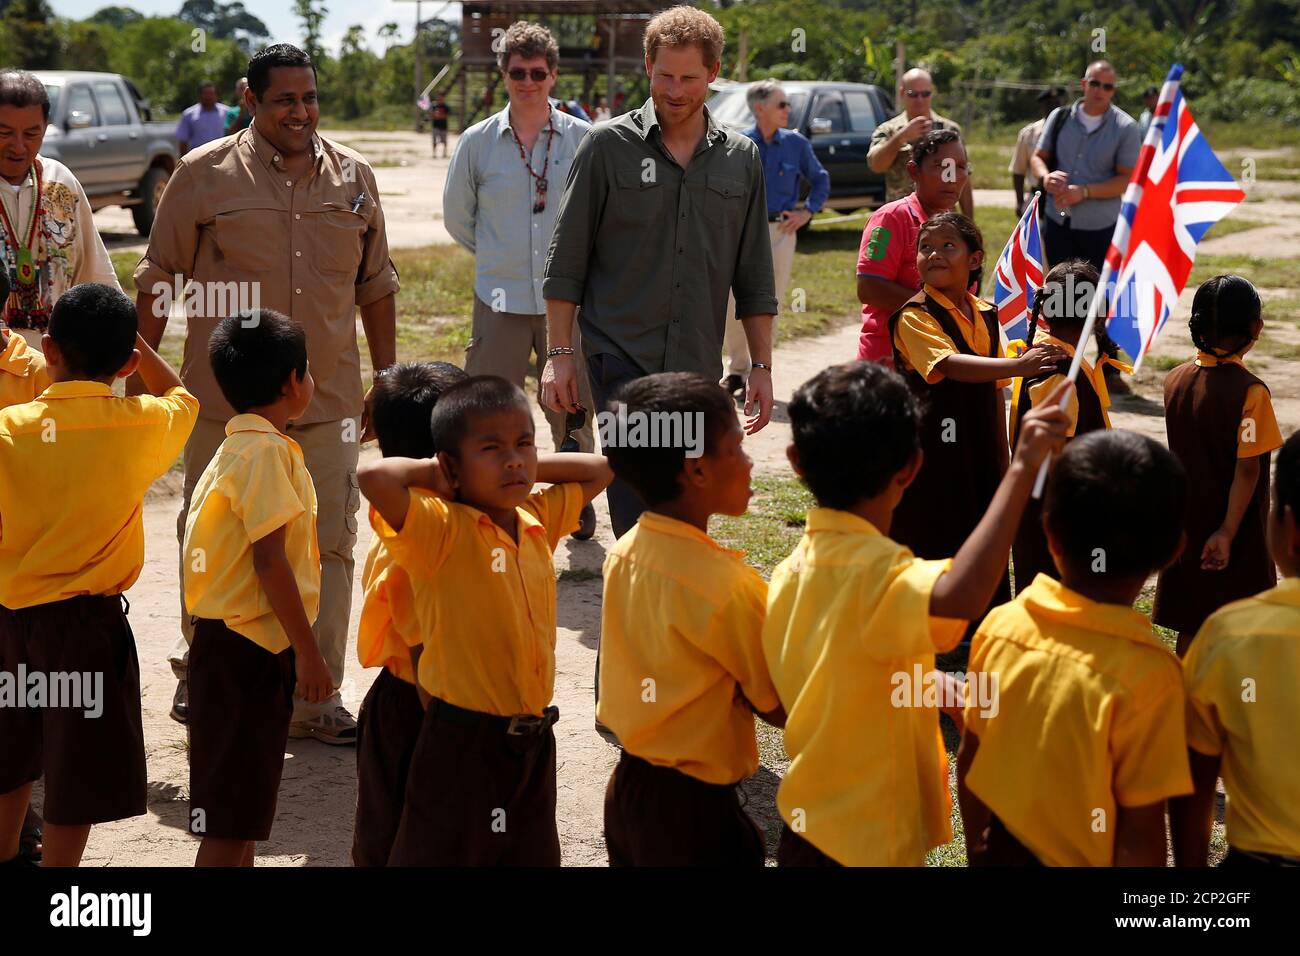 Britain's Prince Harry visits Iwokrama during an official visit in Guyana December 3, 2016.   REUTERS/Carlo Allegri Stock Photo